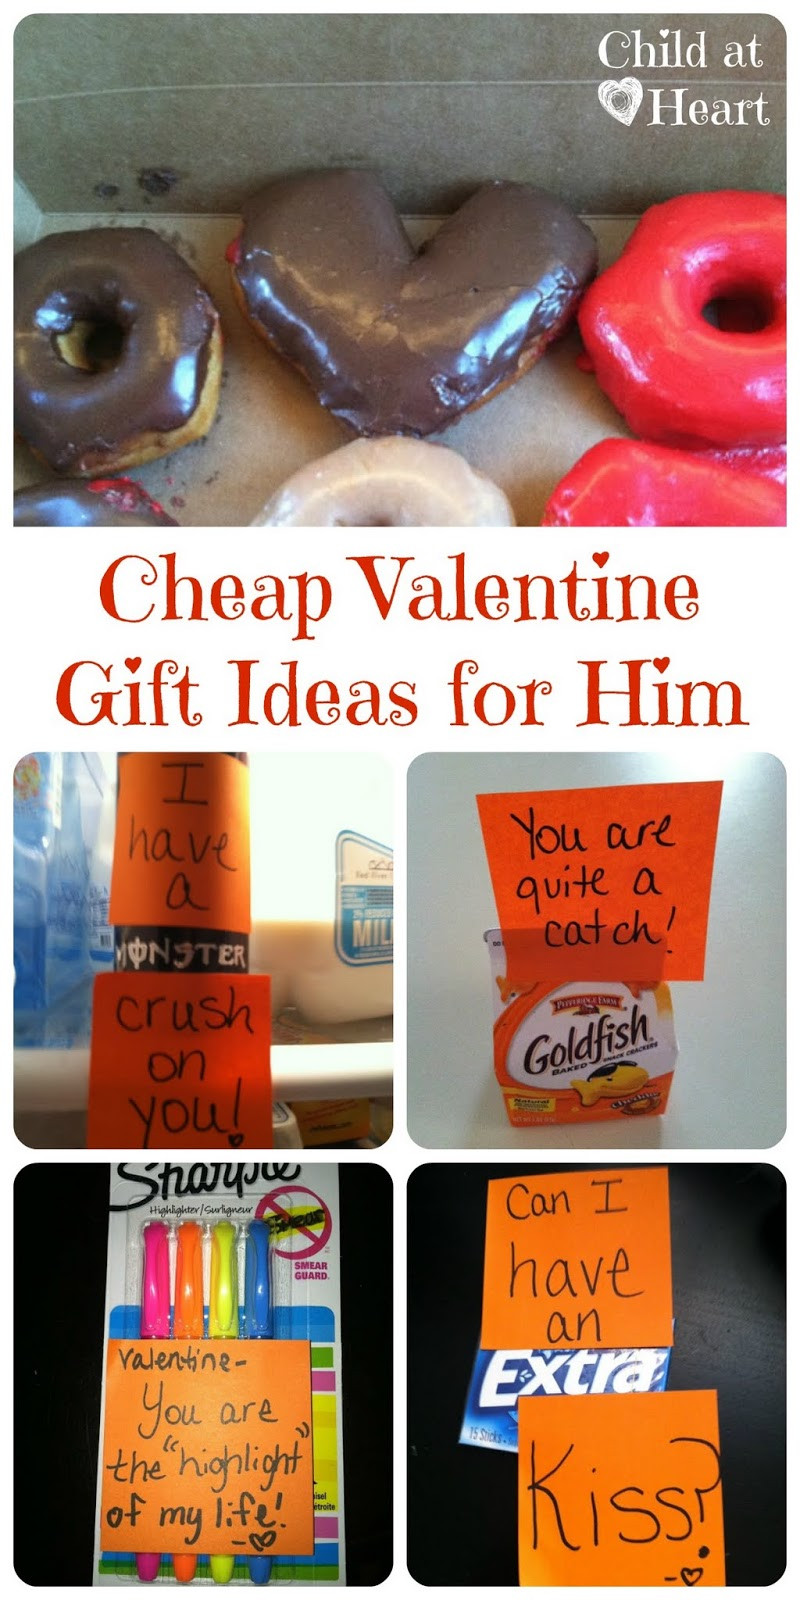 Valentines Gift Ideas For Him Pinterest
 Cheap Valentine Gift Ideas for Him Child at Heart Blog